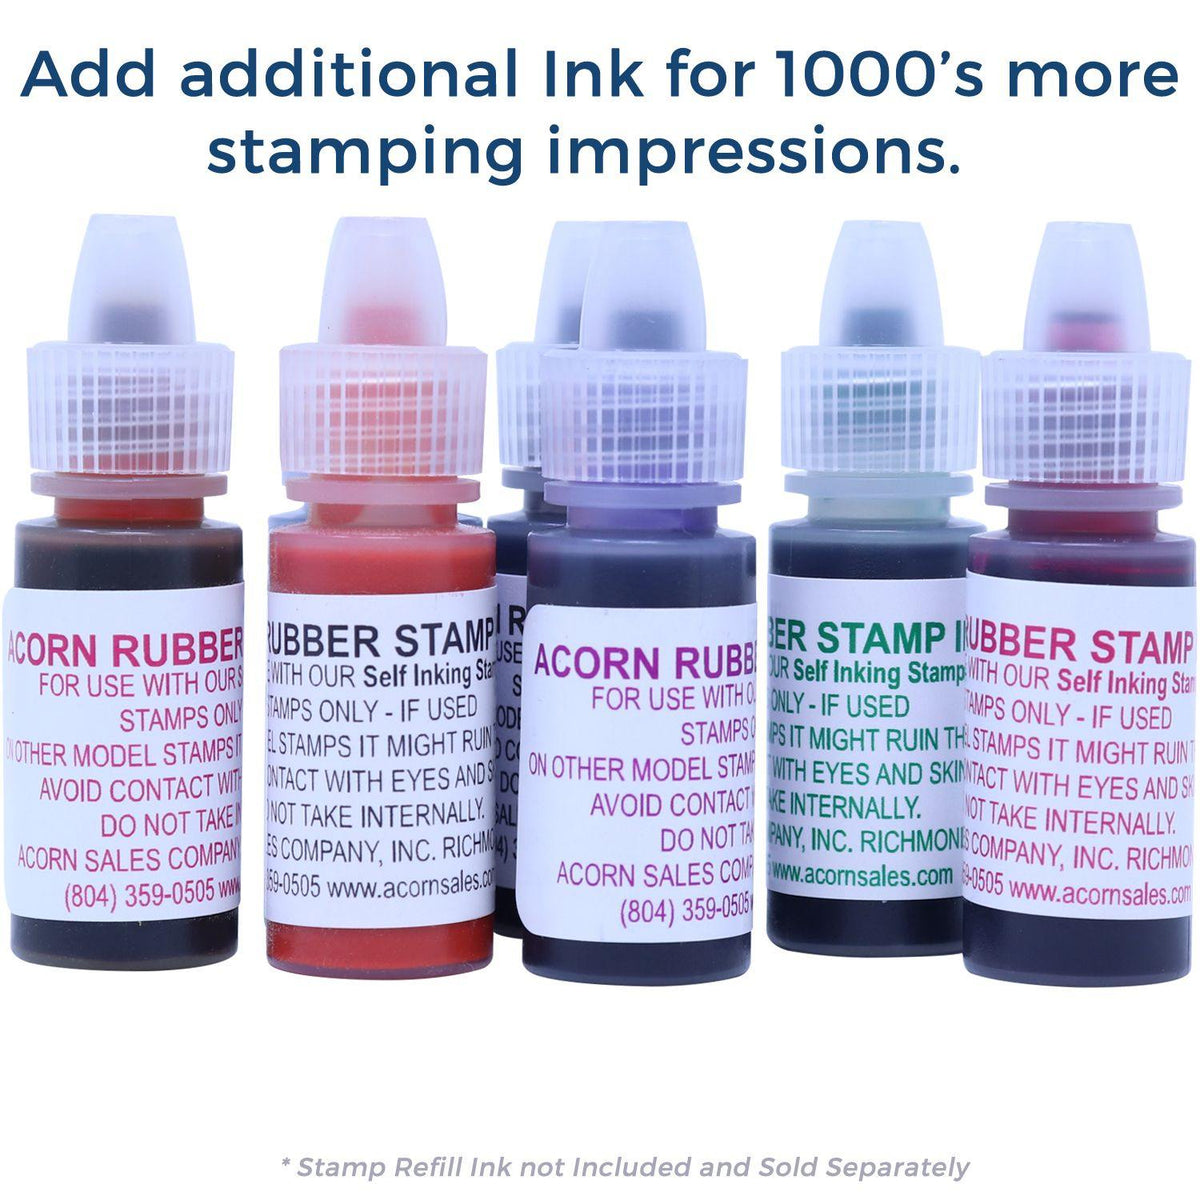 Refill Inks for Large Pre-Inked Faxed with Machine Stamp Available